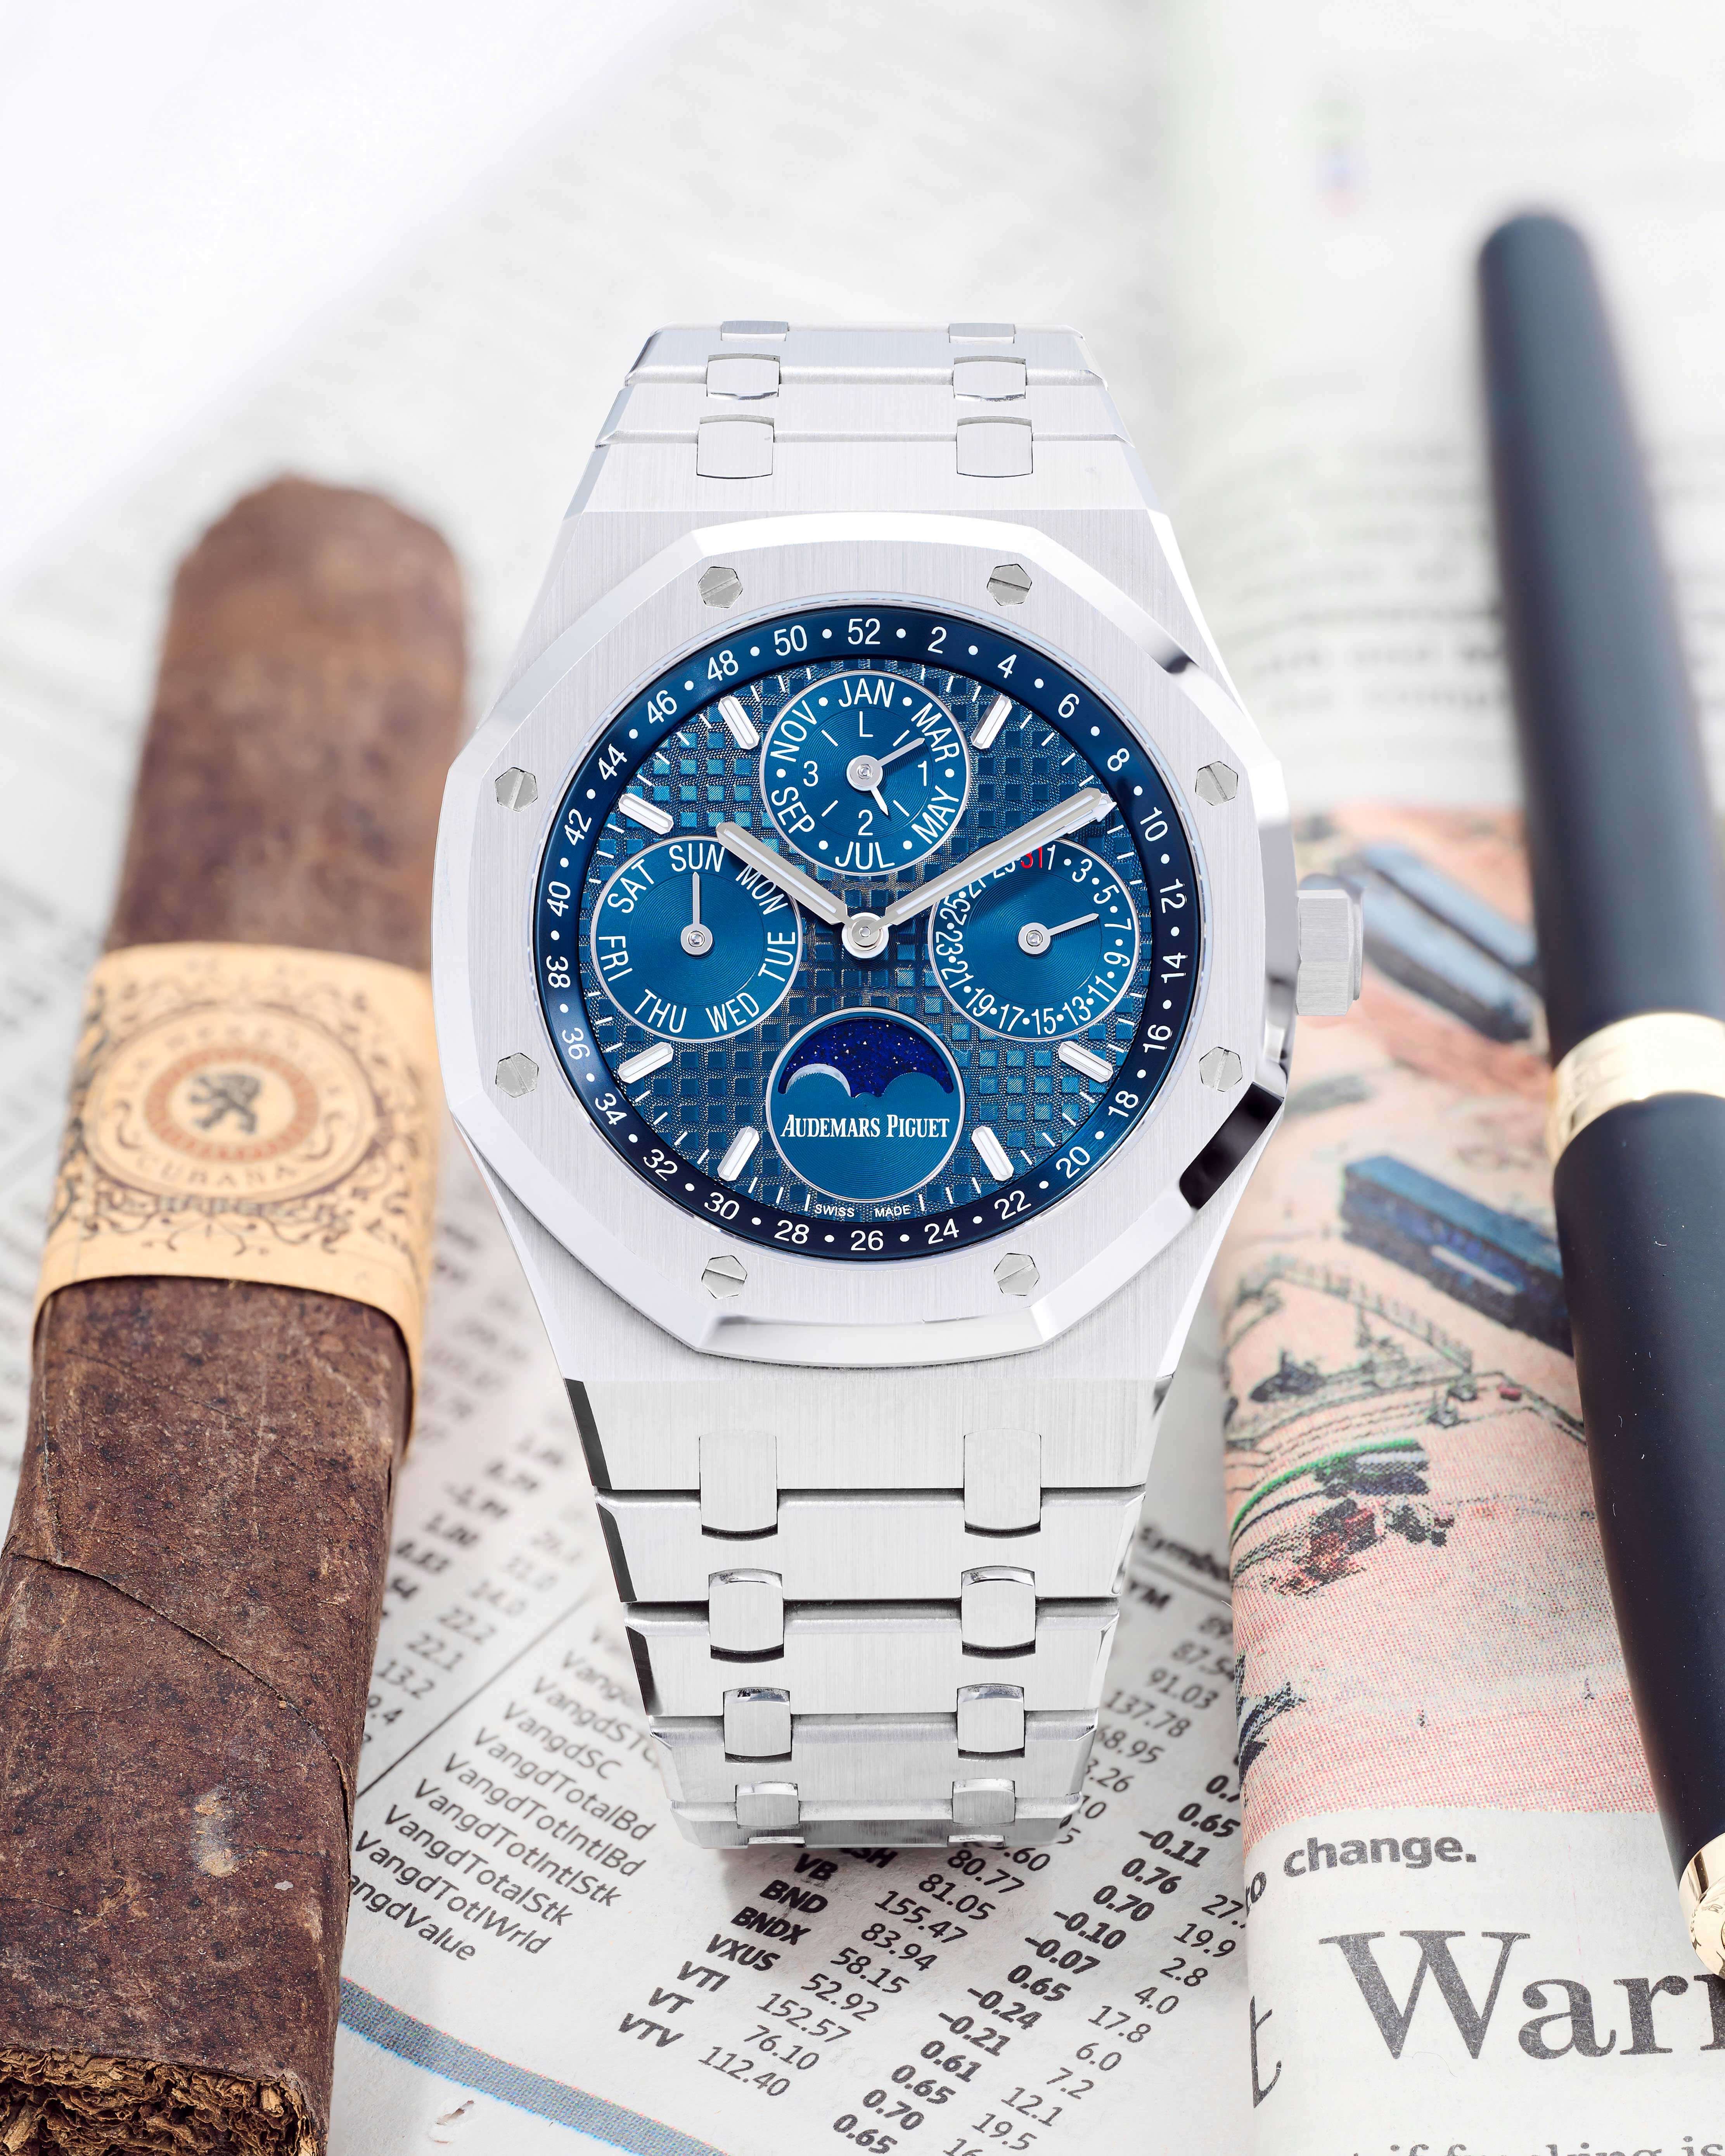 Stainless Steel 41 mm case, Fixed Matching Bezel, Night Blue Dial on a Newspaper with Cigar and Black Pen